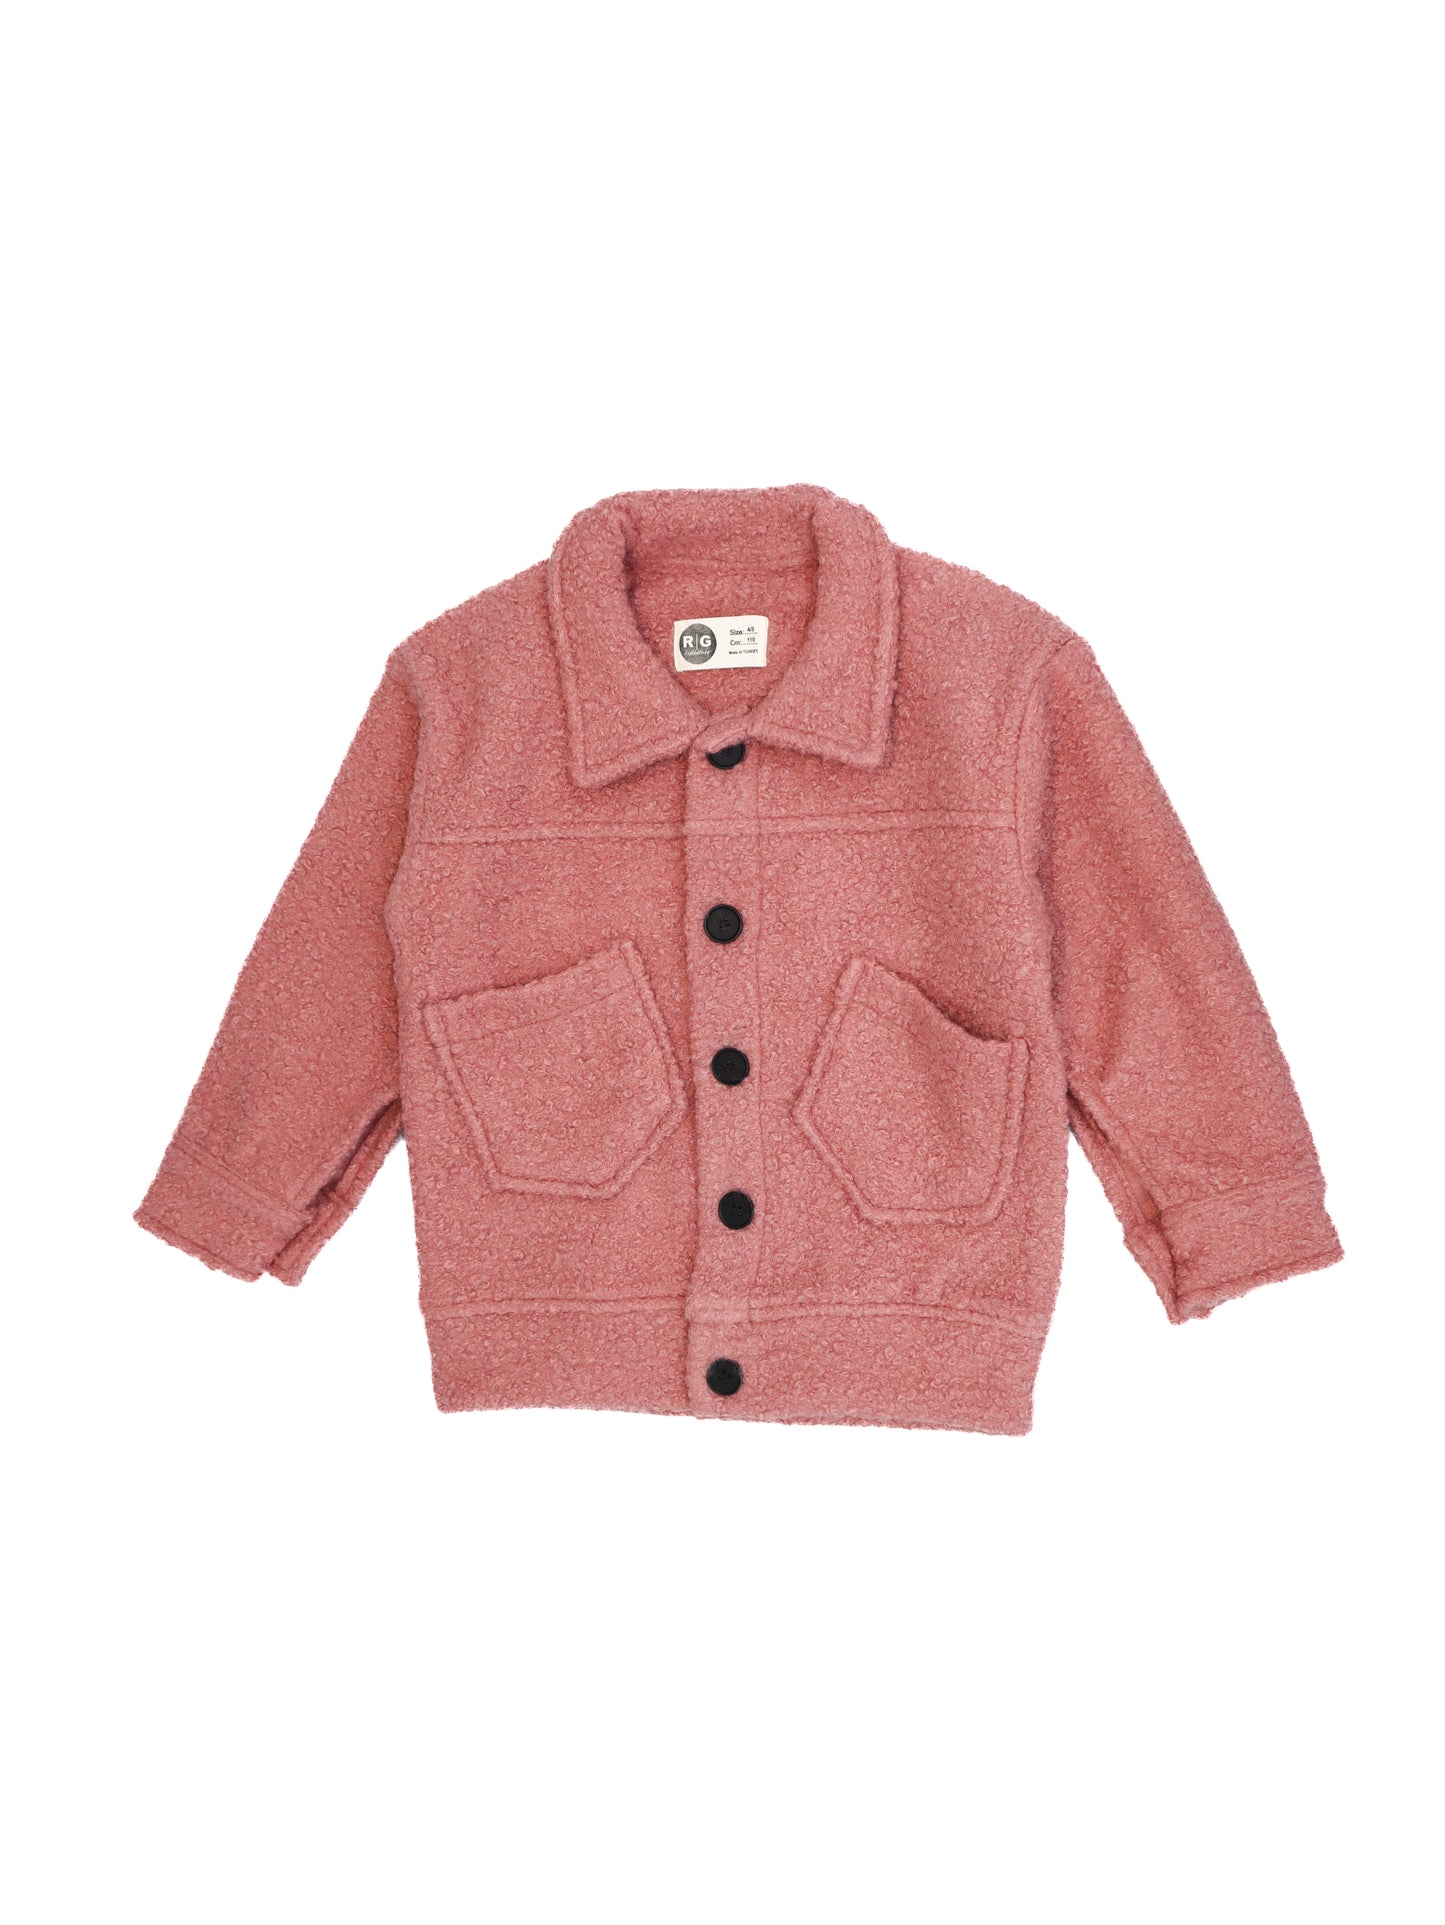 Unisex Children's Short Coat with Double Pockets and Buttons